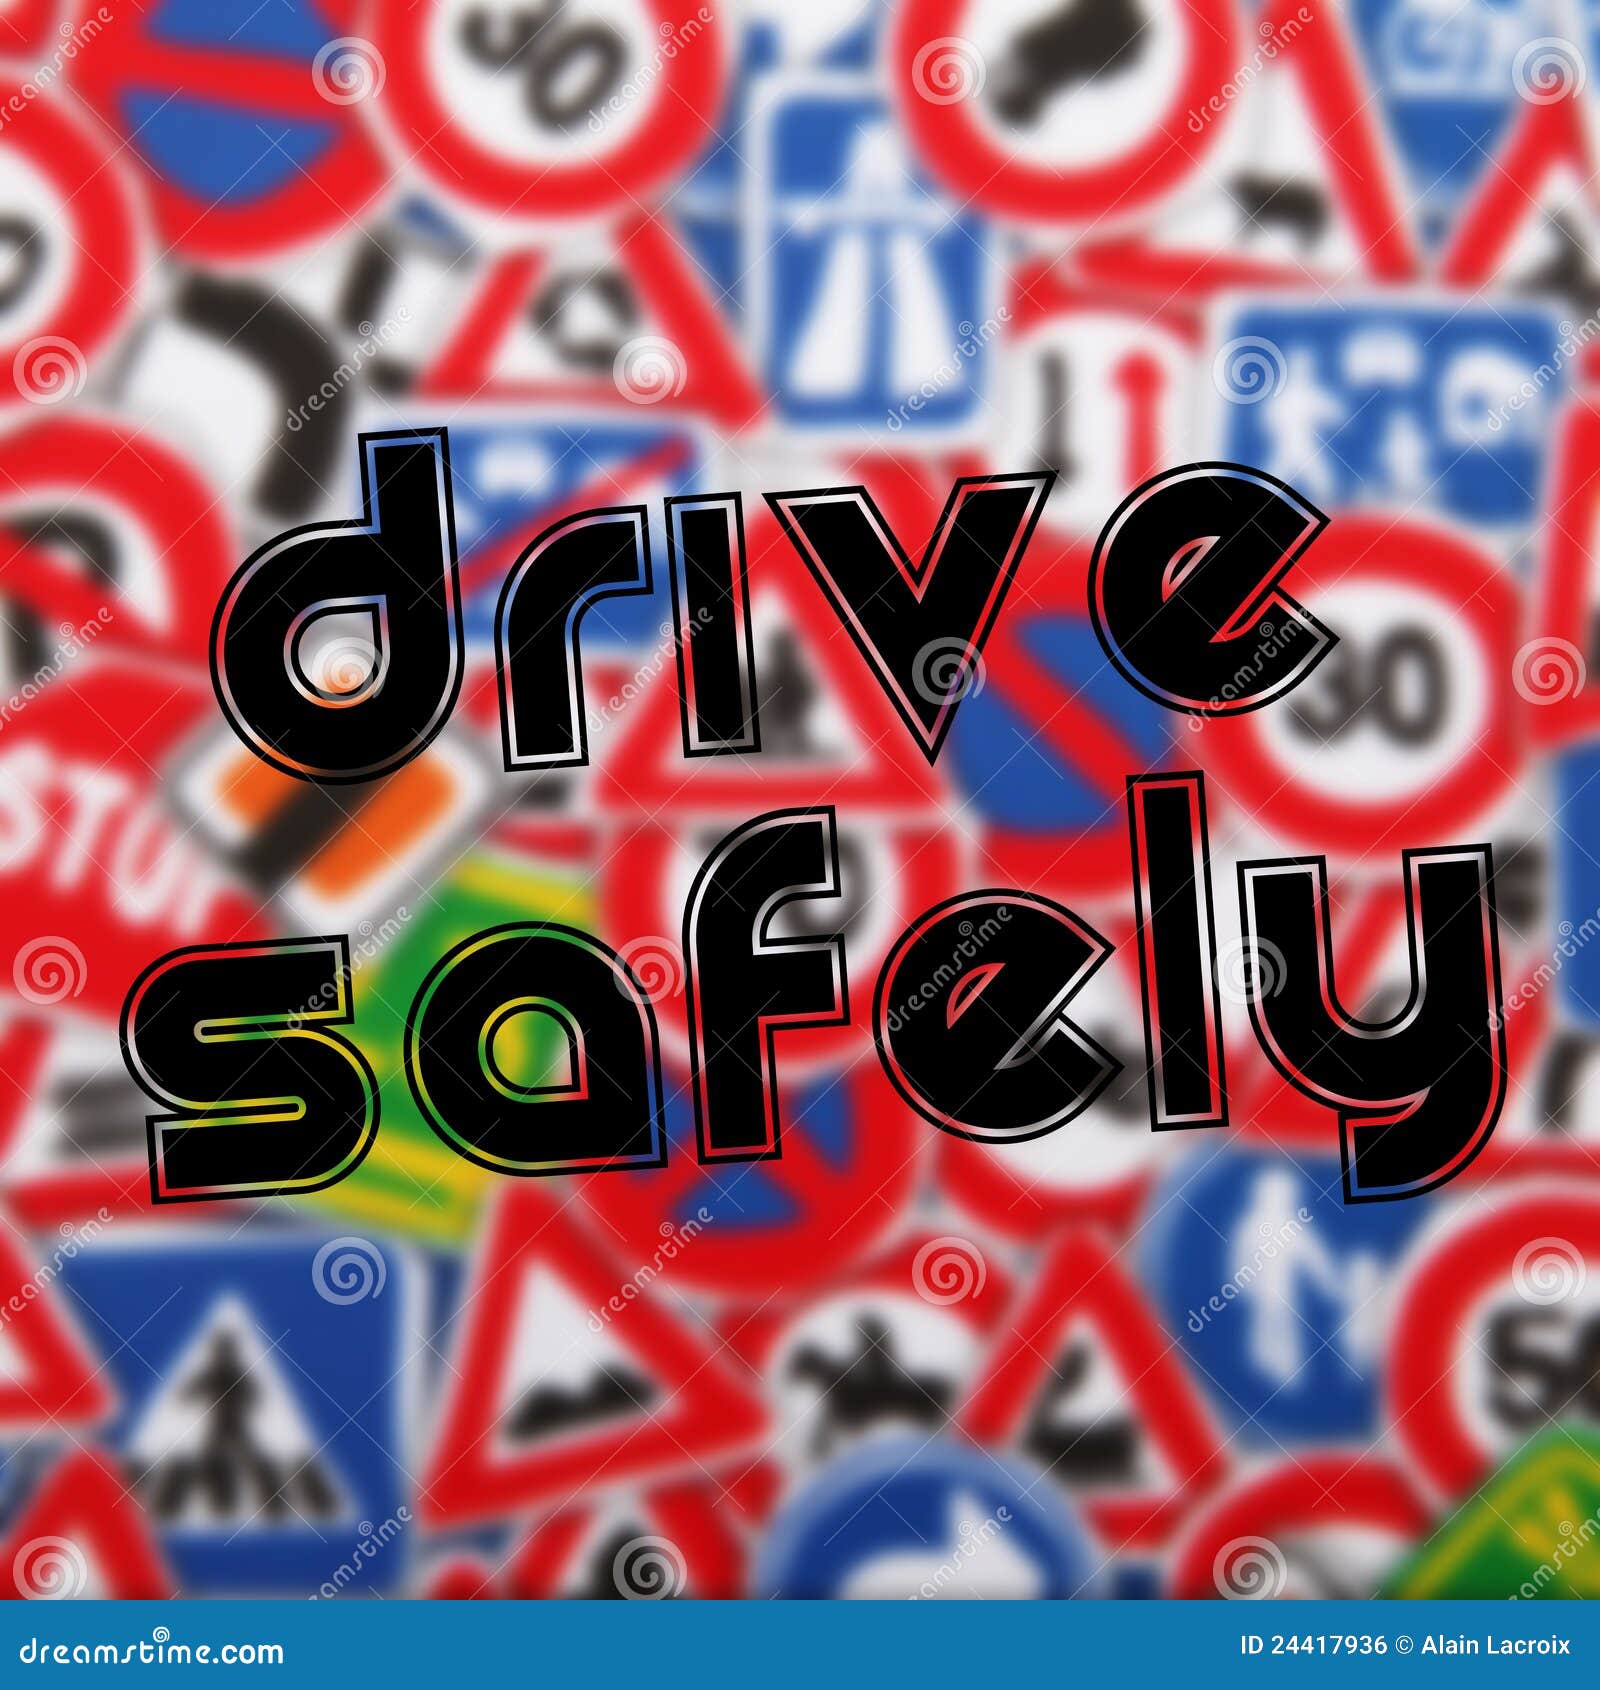 i drive safely